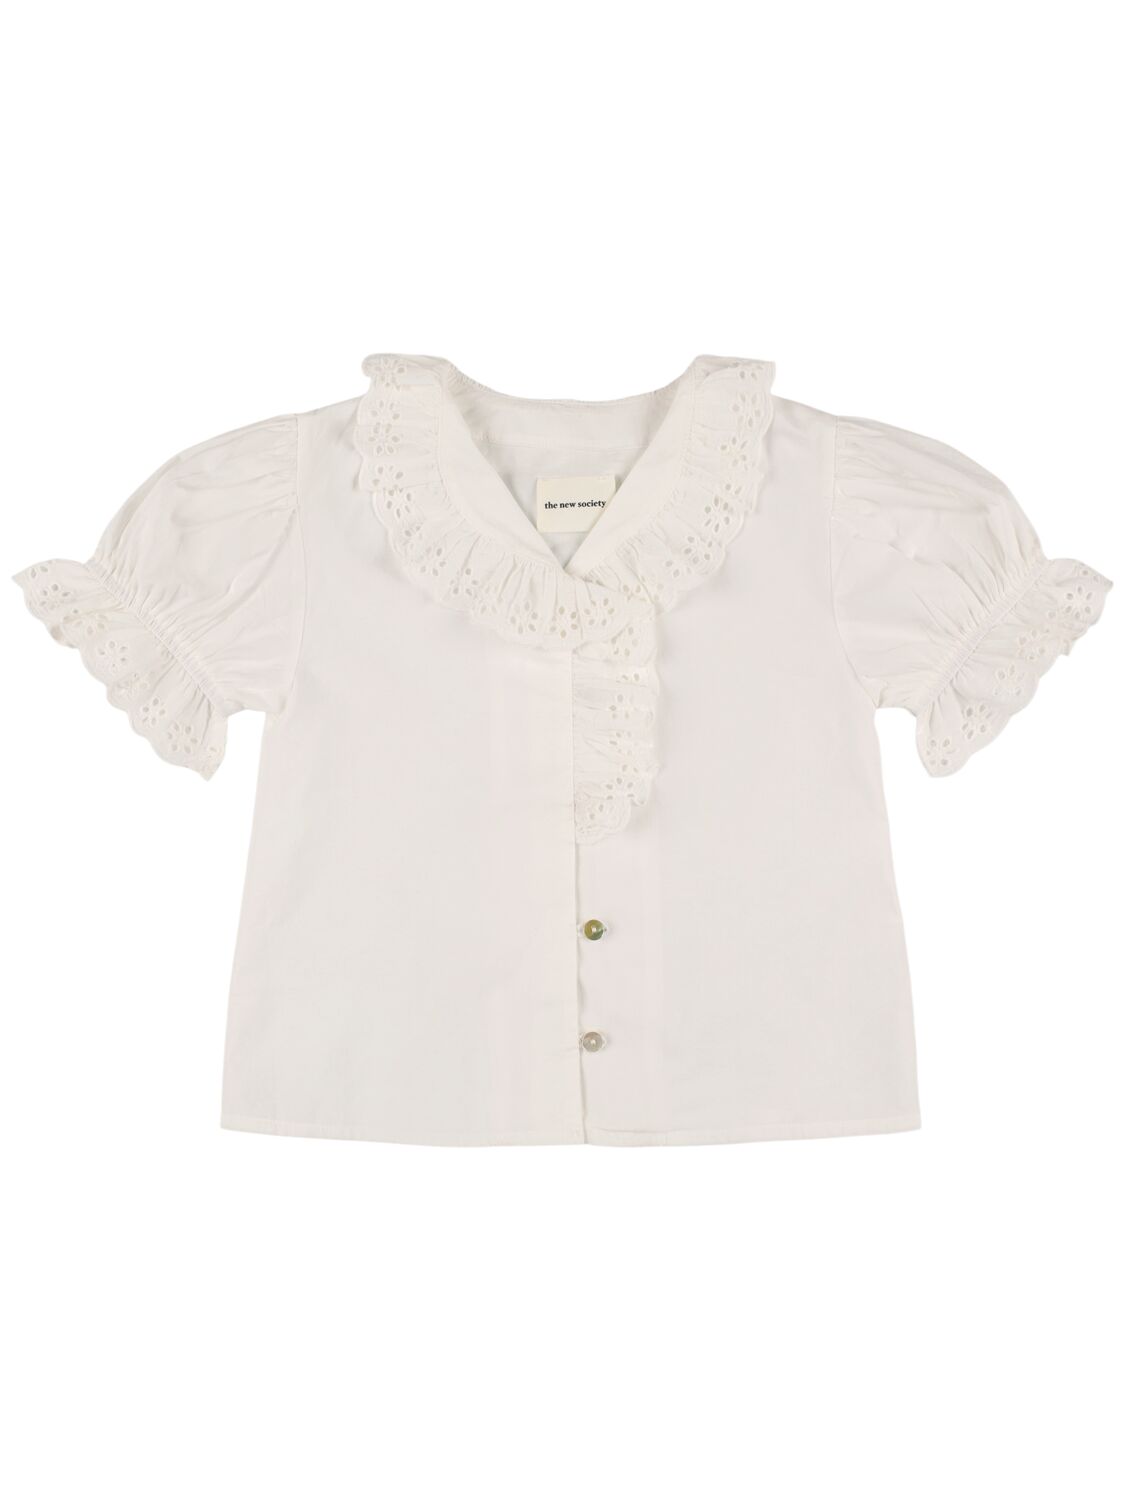 The New Society Kids' Embroidered Cotton Poplin Shirt In Off White